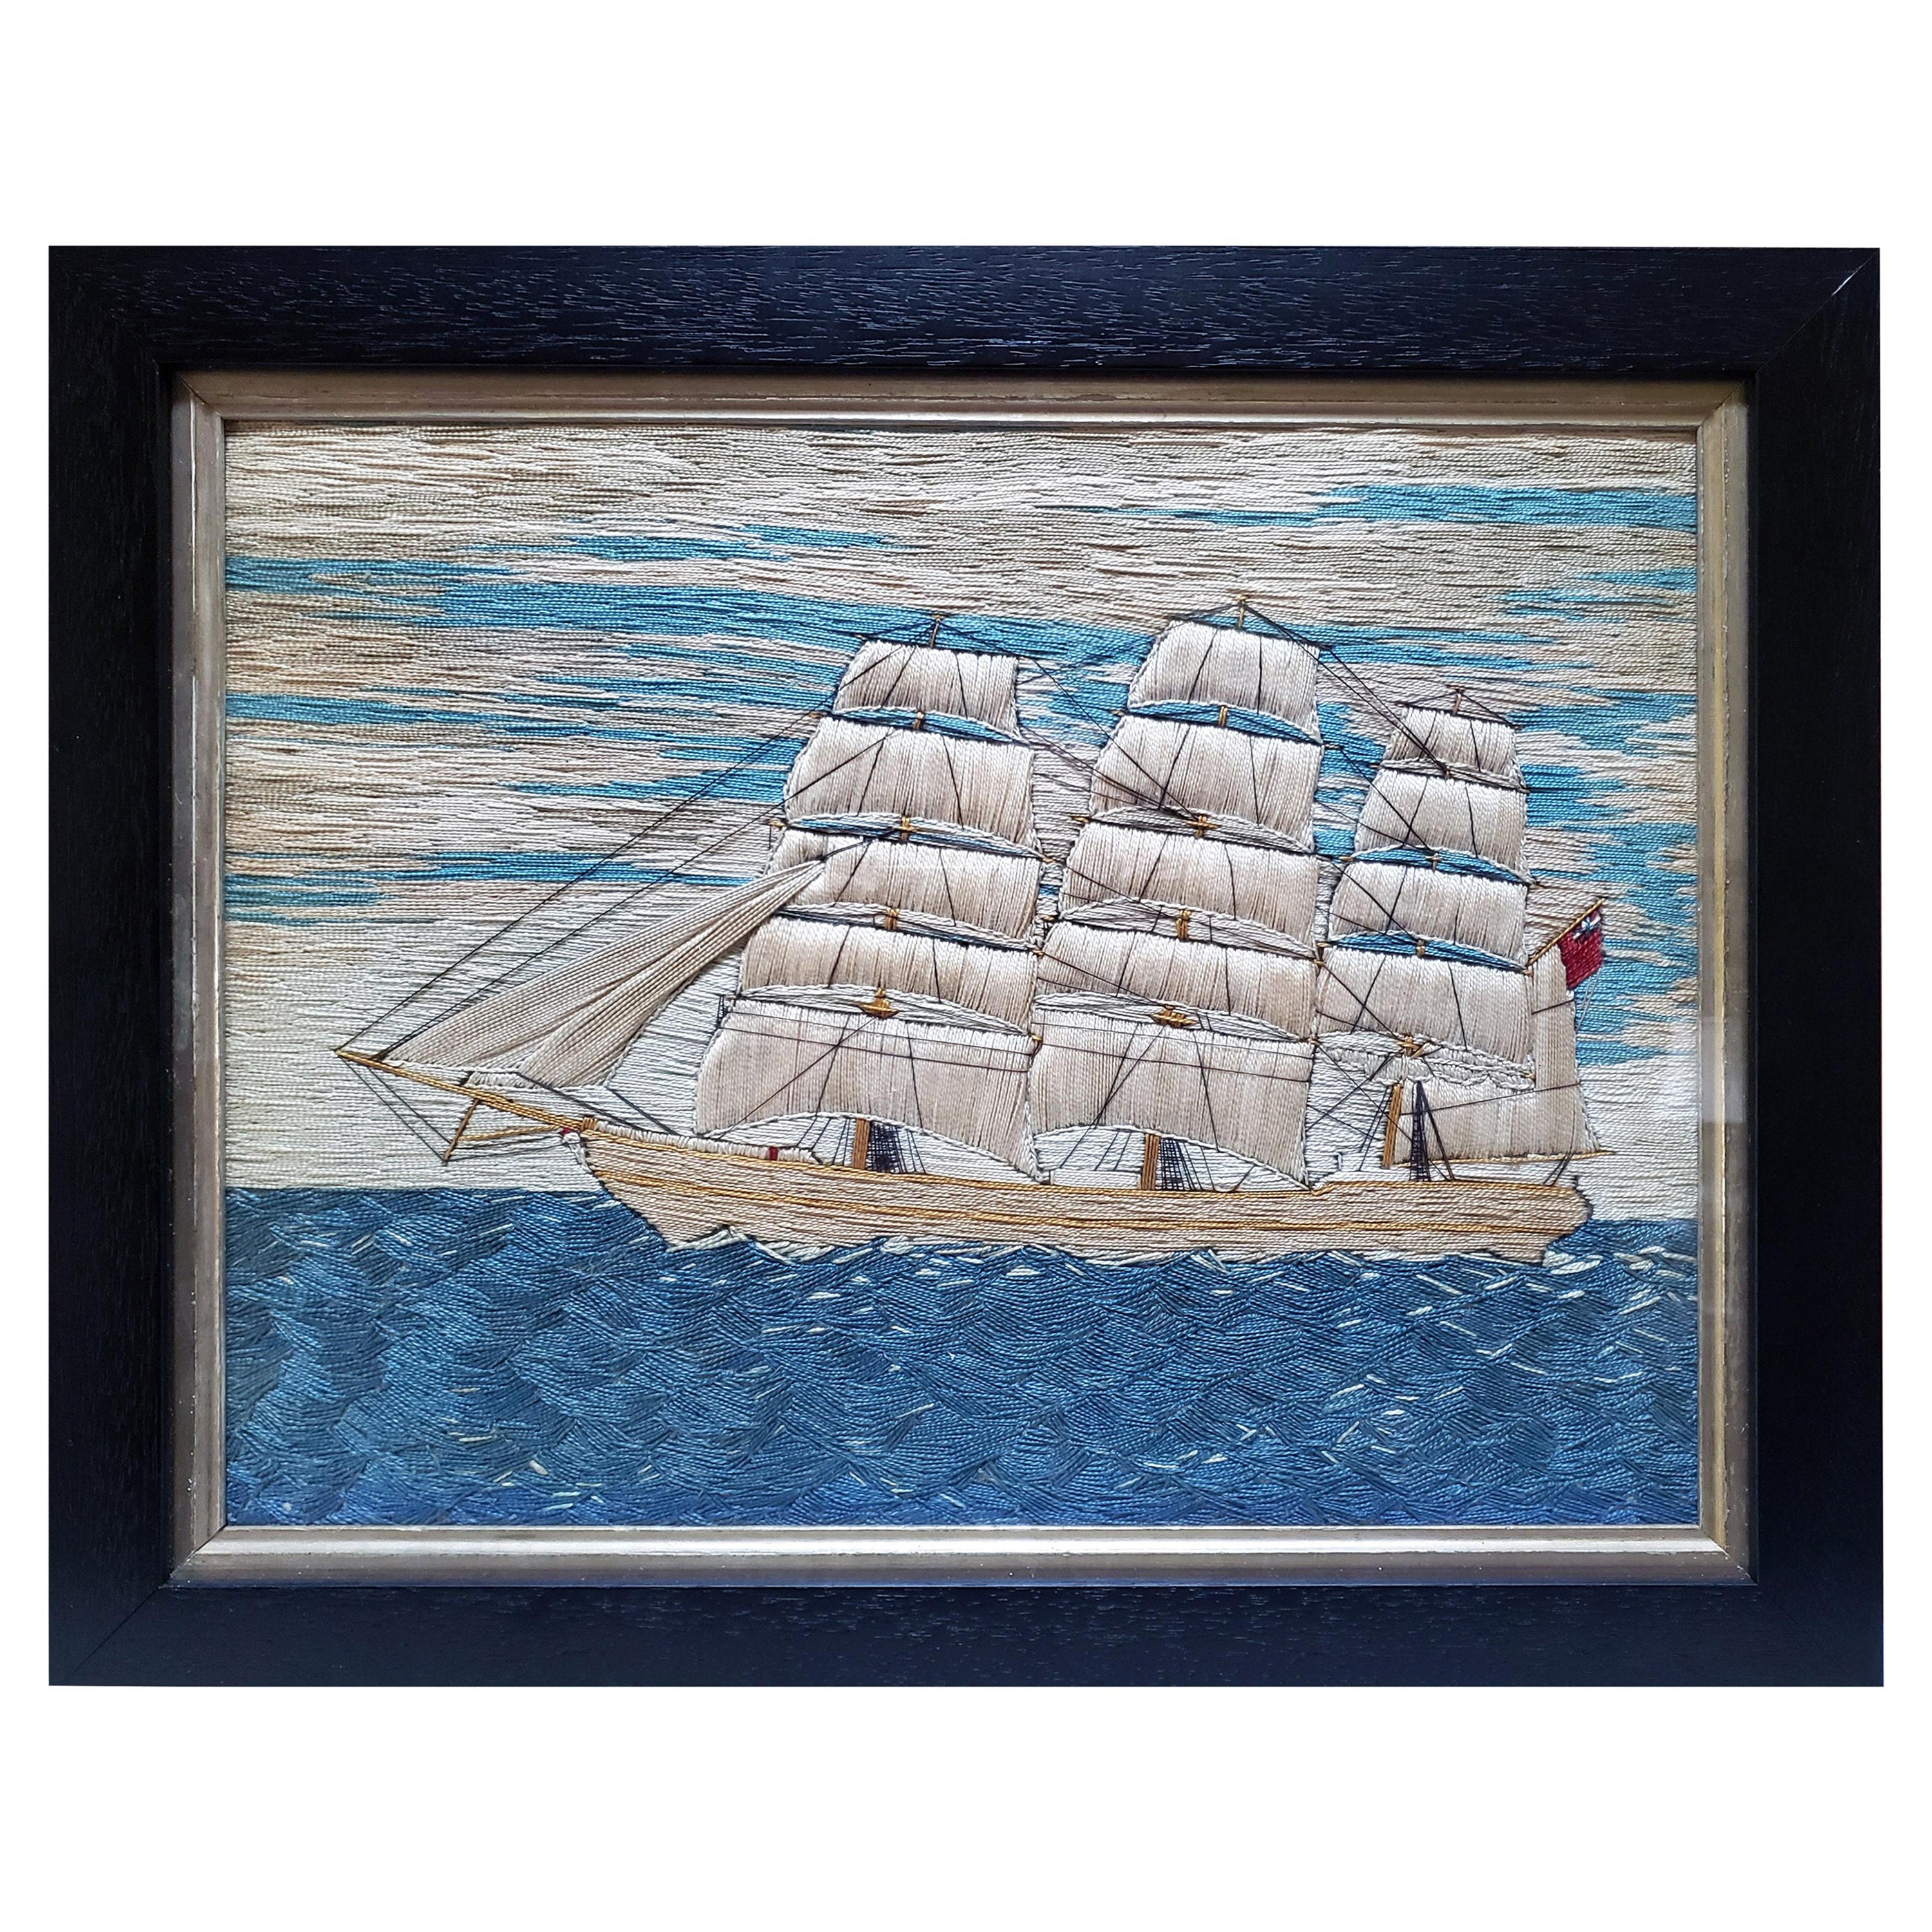 British Sailor's "Woolwork" But Made of Pearled Cotton of a Merchant Navy Ship